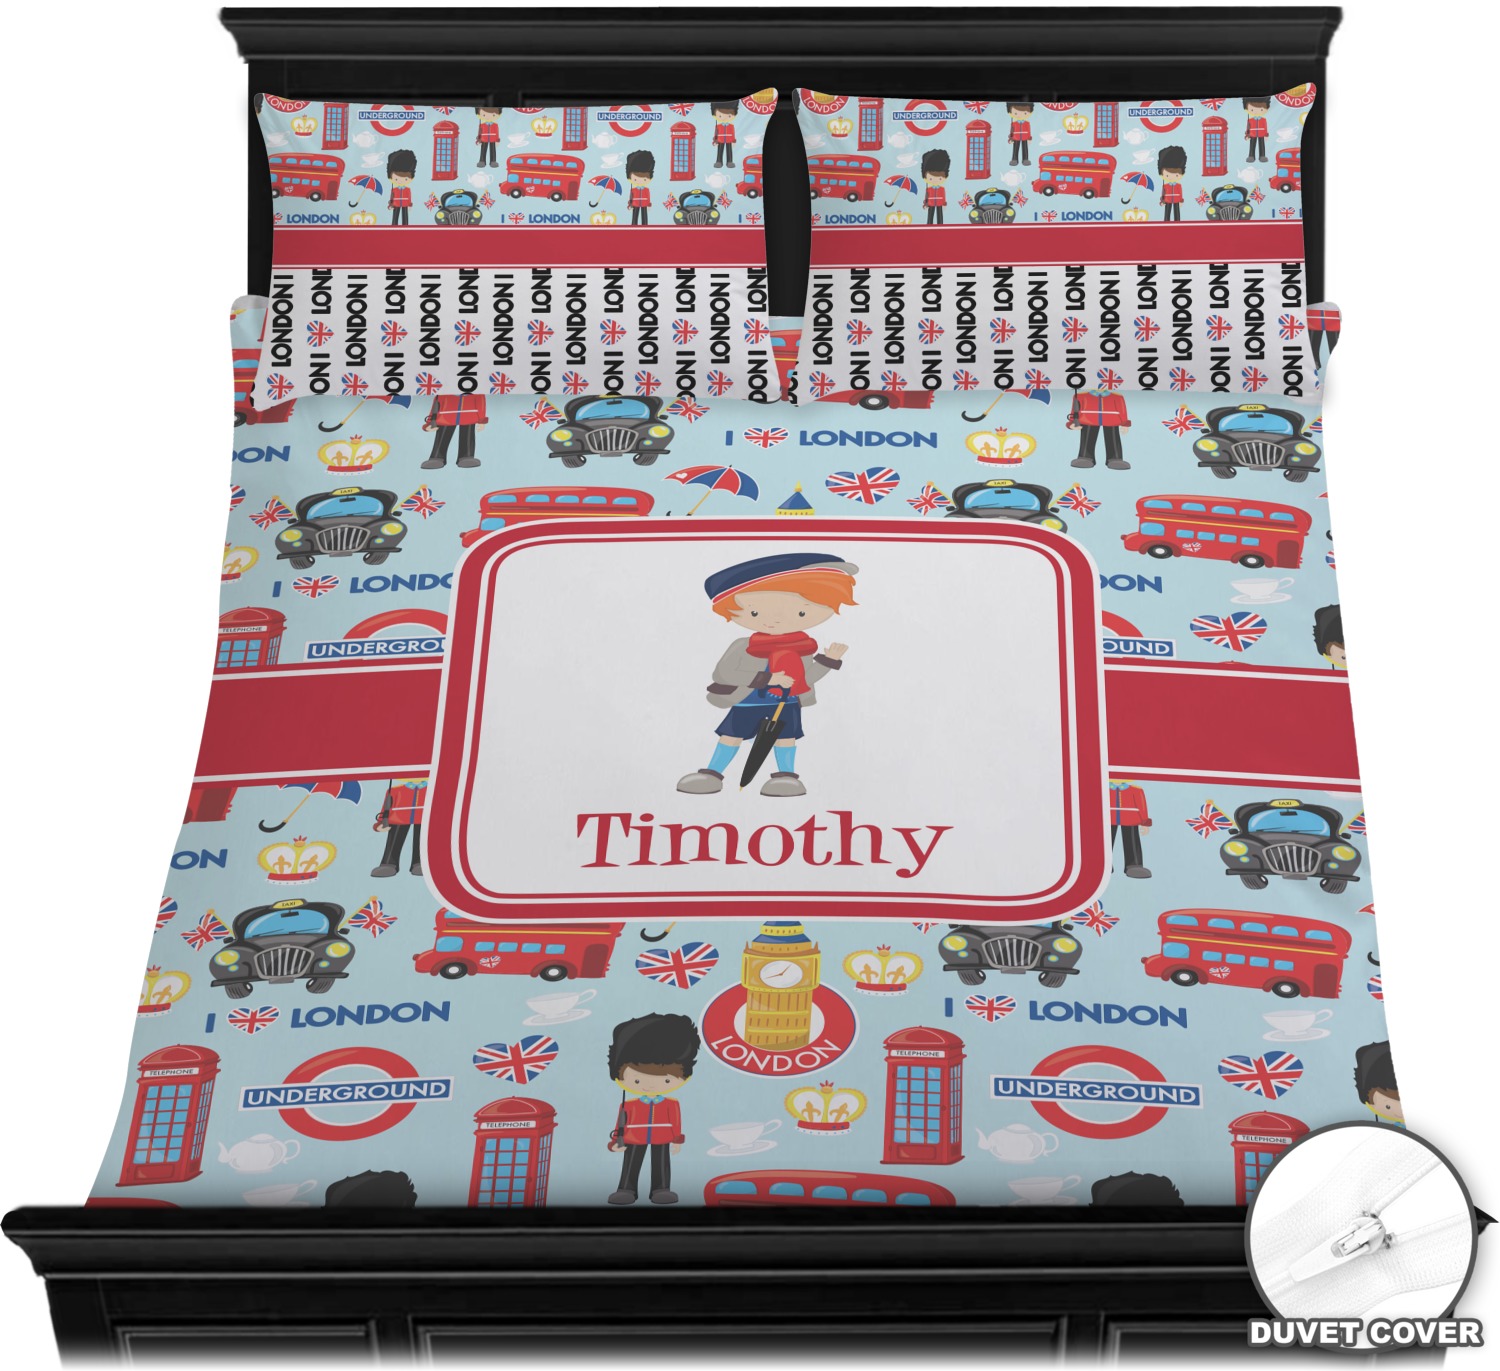 London Duvet Covers Personalized Youcustomizeit